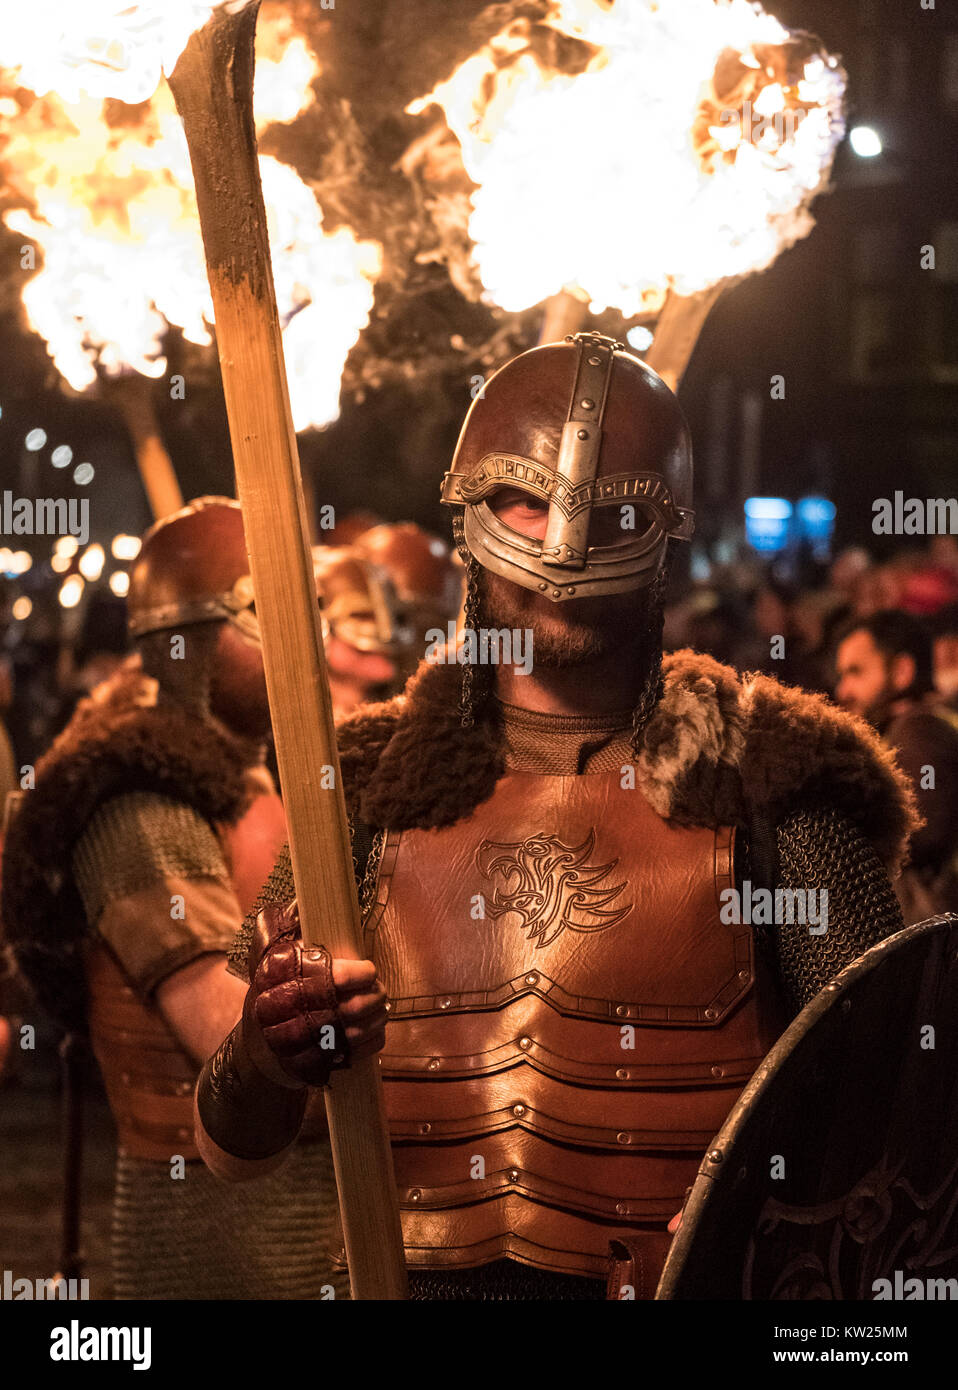 Edinburgh, Scotland,United Kingdom. 30 December, 2017. Members of legendary Up Helly Aa Vikings from Shetland, in full costume and with flaming torches before Torchlight Procession which forms one part of Edinburgh's Hogmanay celebrations. Credit: Iain Masterton/Alamy Live News Stock Photo